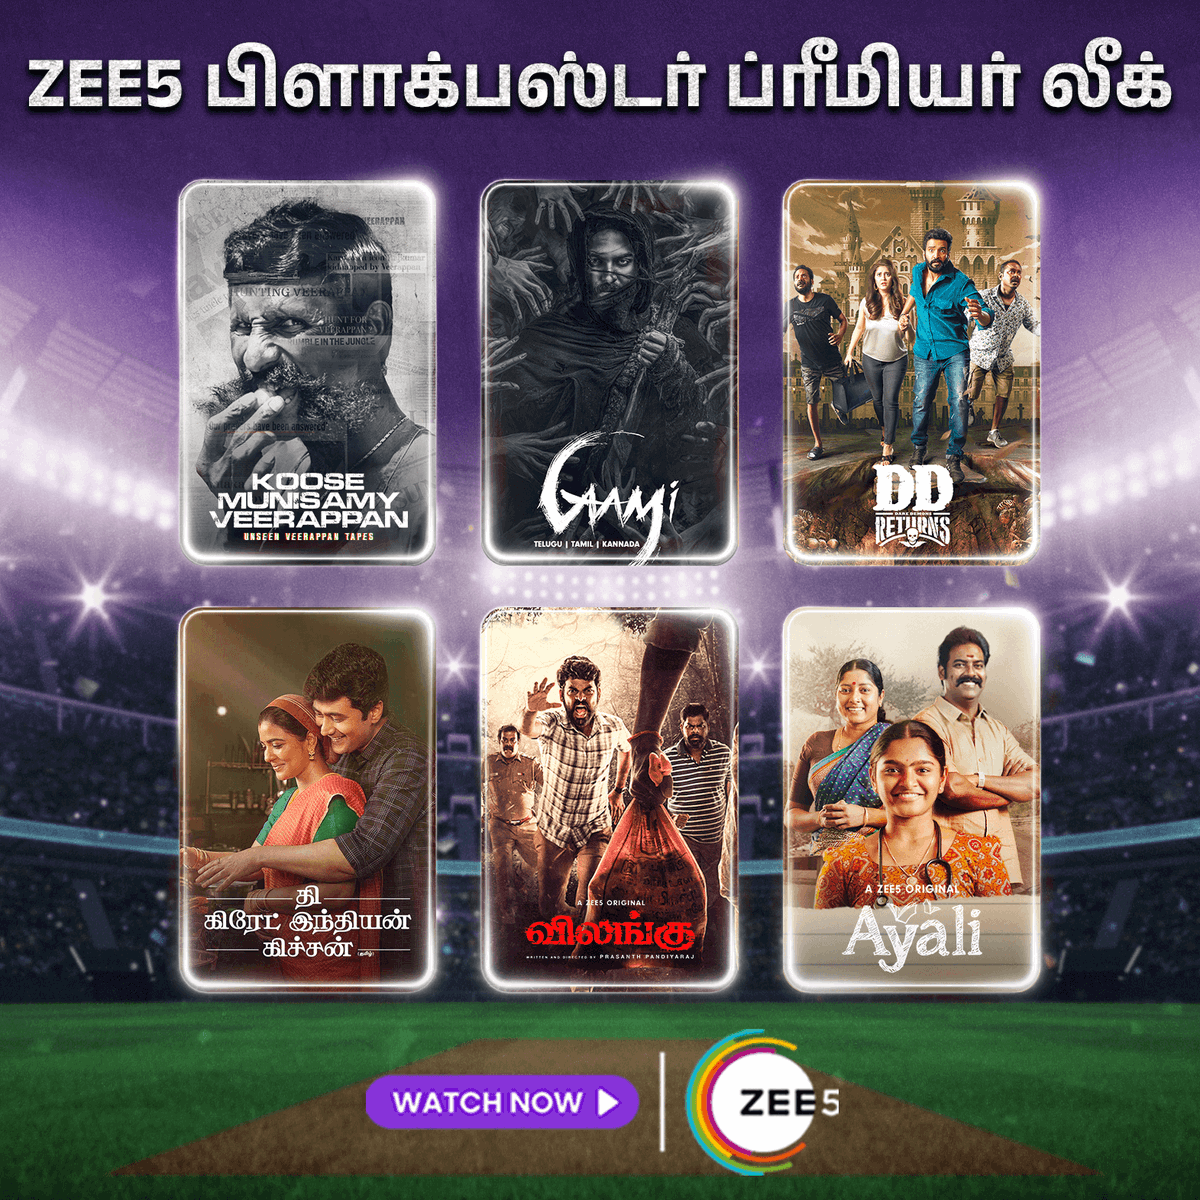 Experience a cinematic six with the Blockbuster Premier League on ZEE5! 🏏🎬

Watch your favourite movies and shows anywhere anytime only on ZEE5🍿

#KooseMunisamyVeerappan #Gaami #Ayali #Santhanam #ZEE5Tamil #ZEE5 #WatchOnZEE5